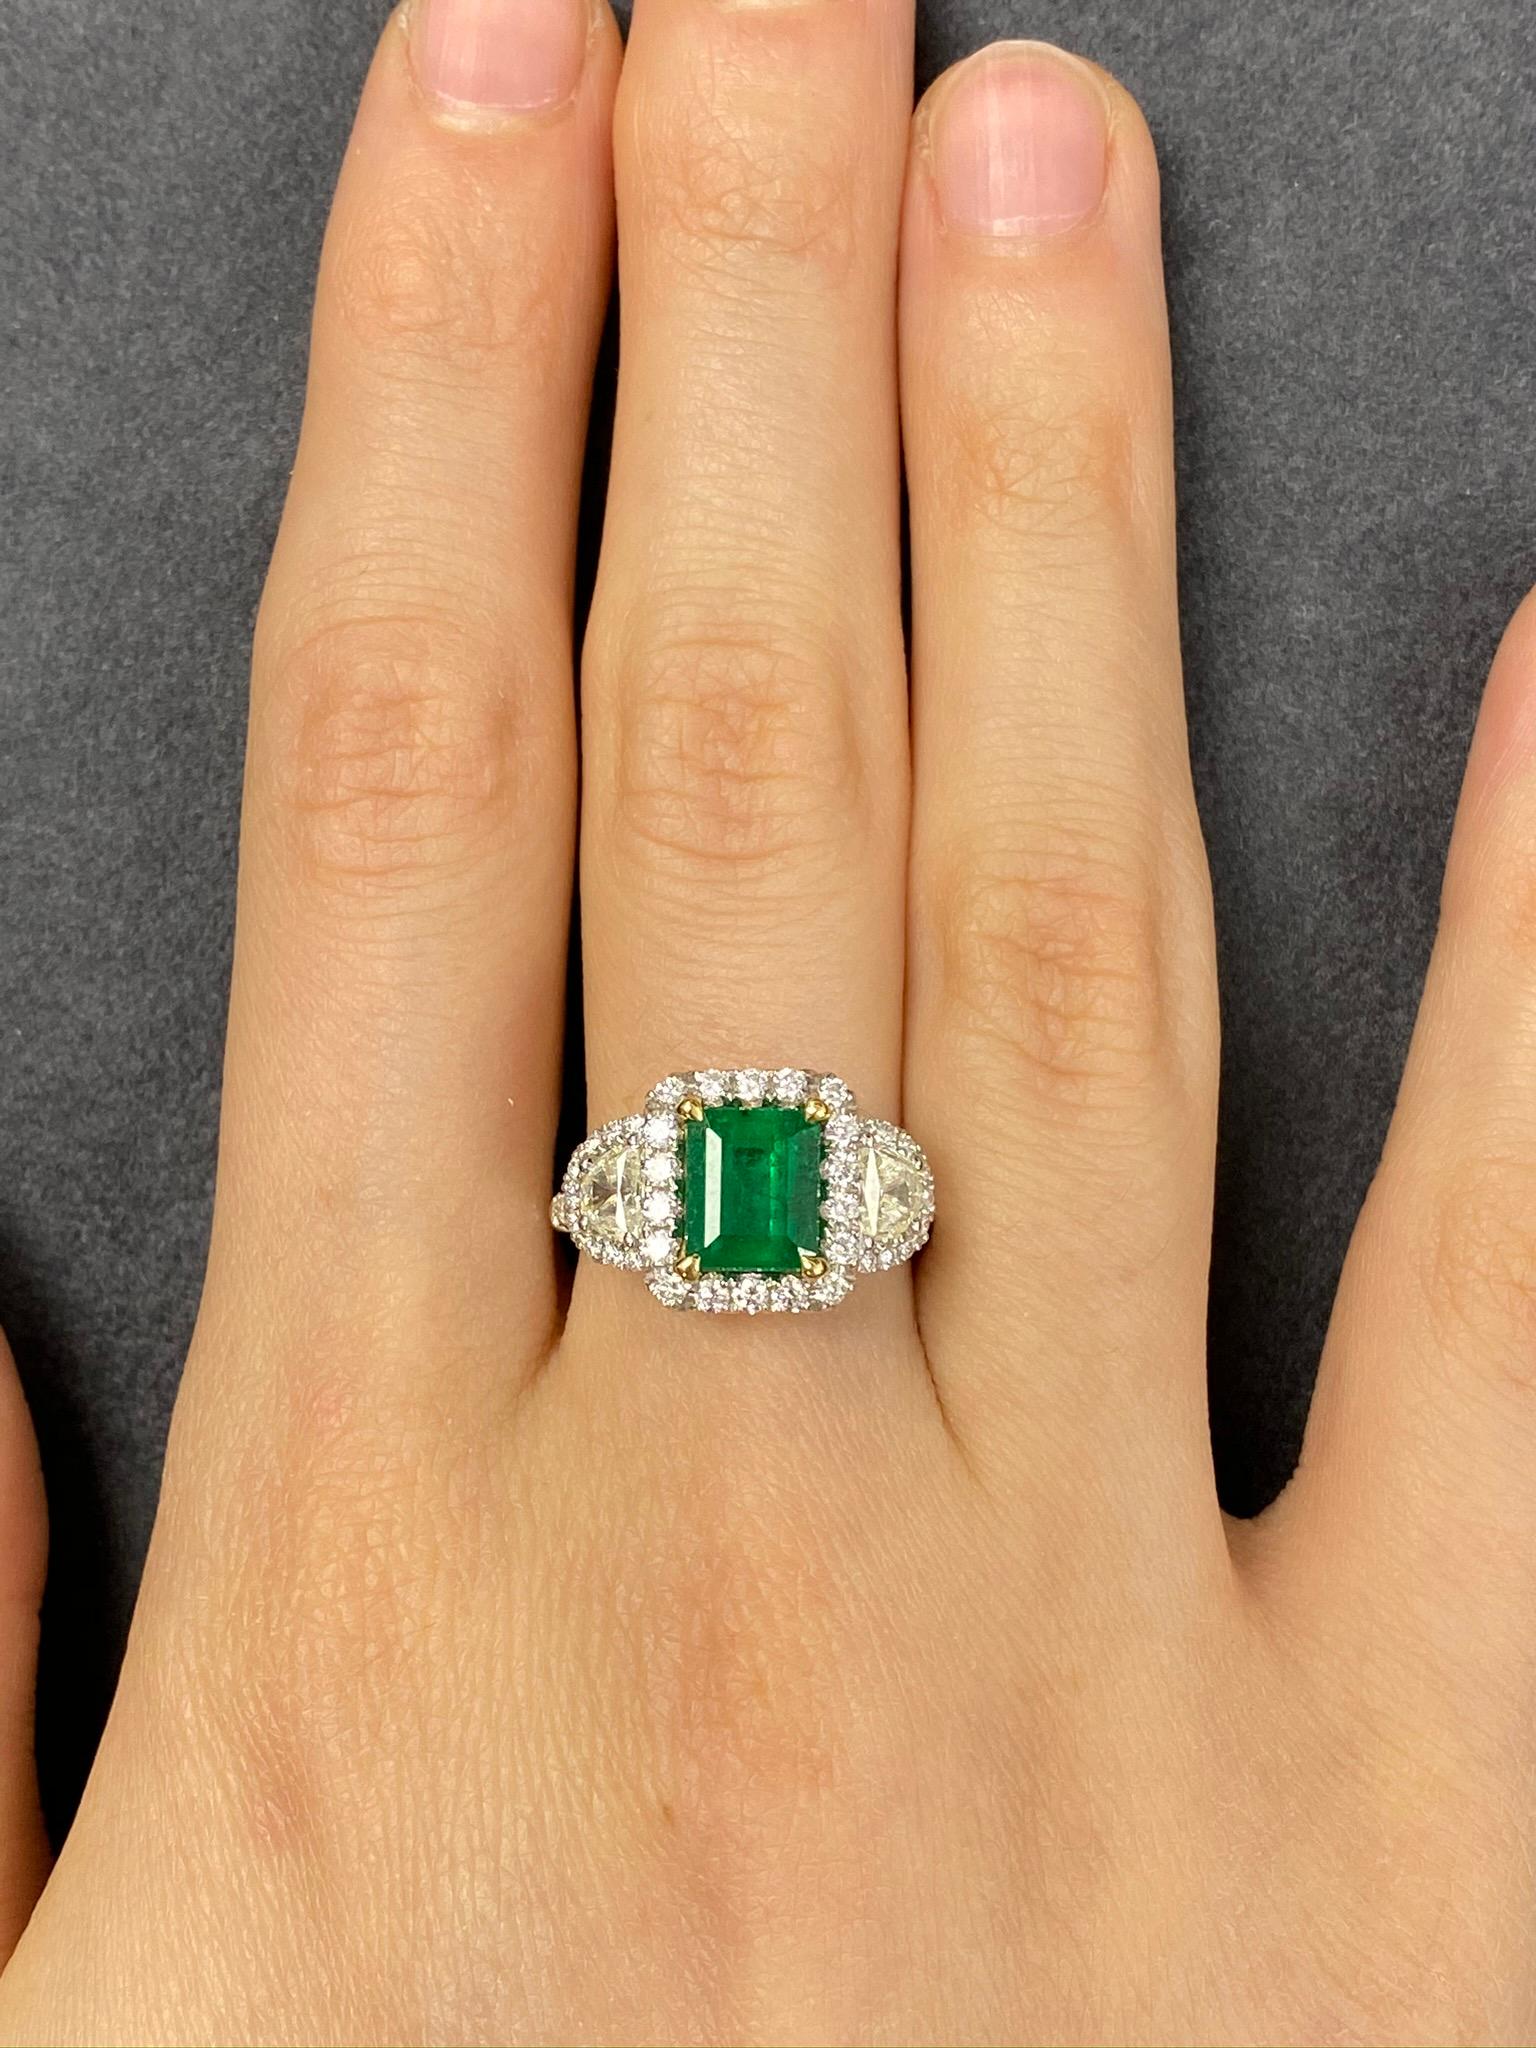 1.58 Carat Emerald and Diamond Cocktail Ring For Sale 2